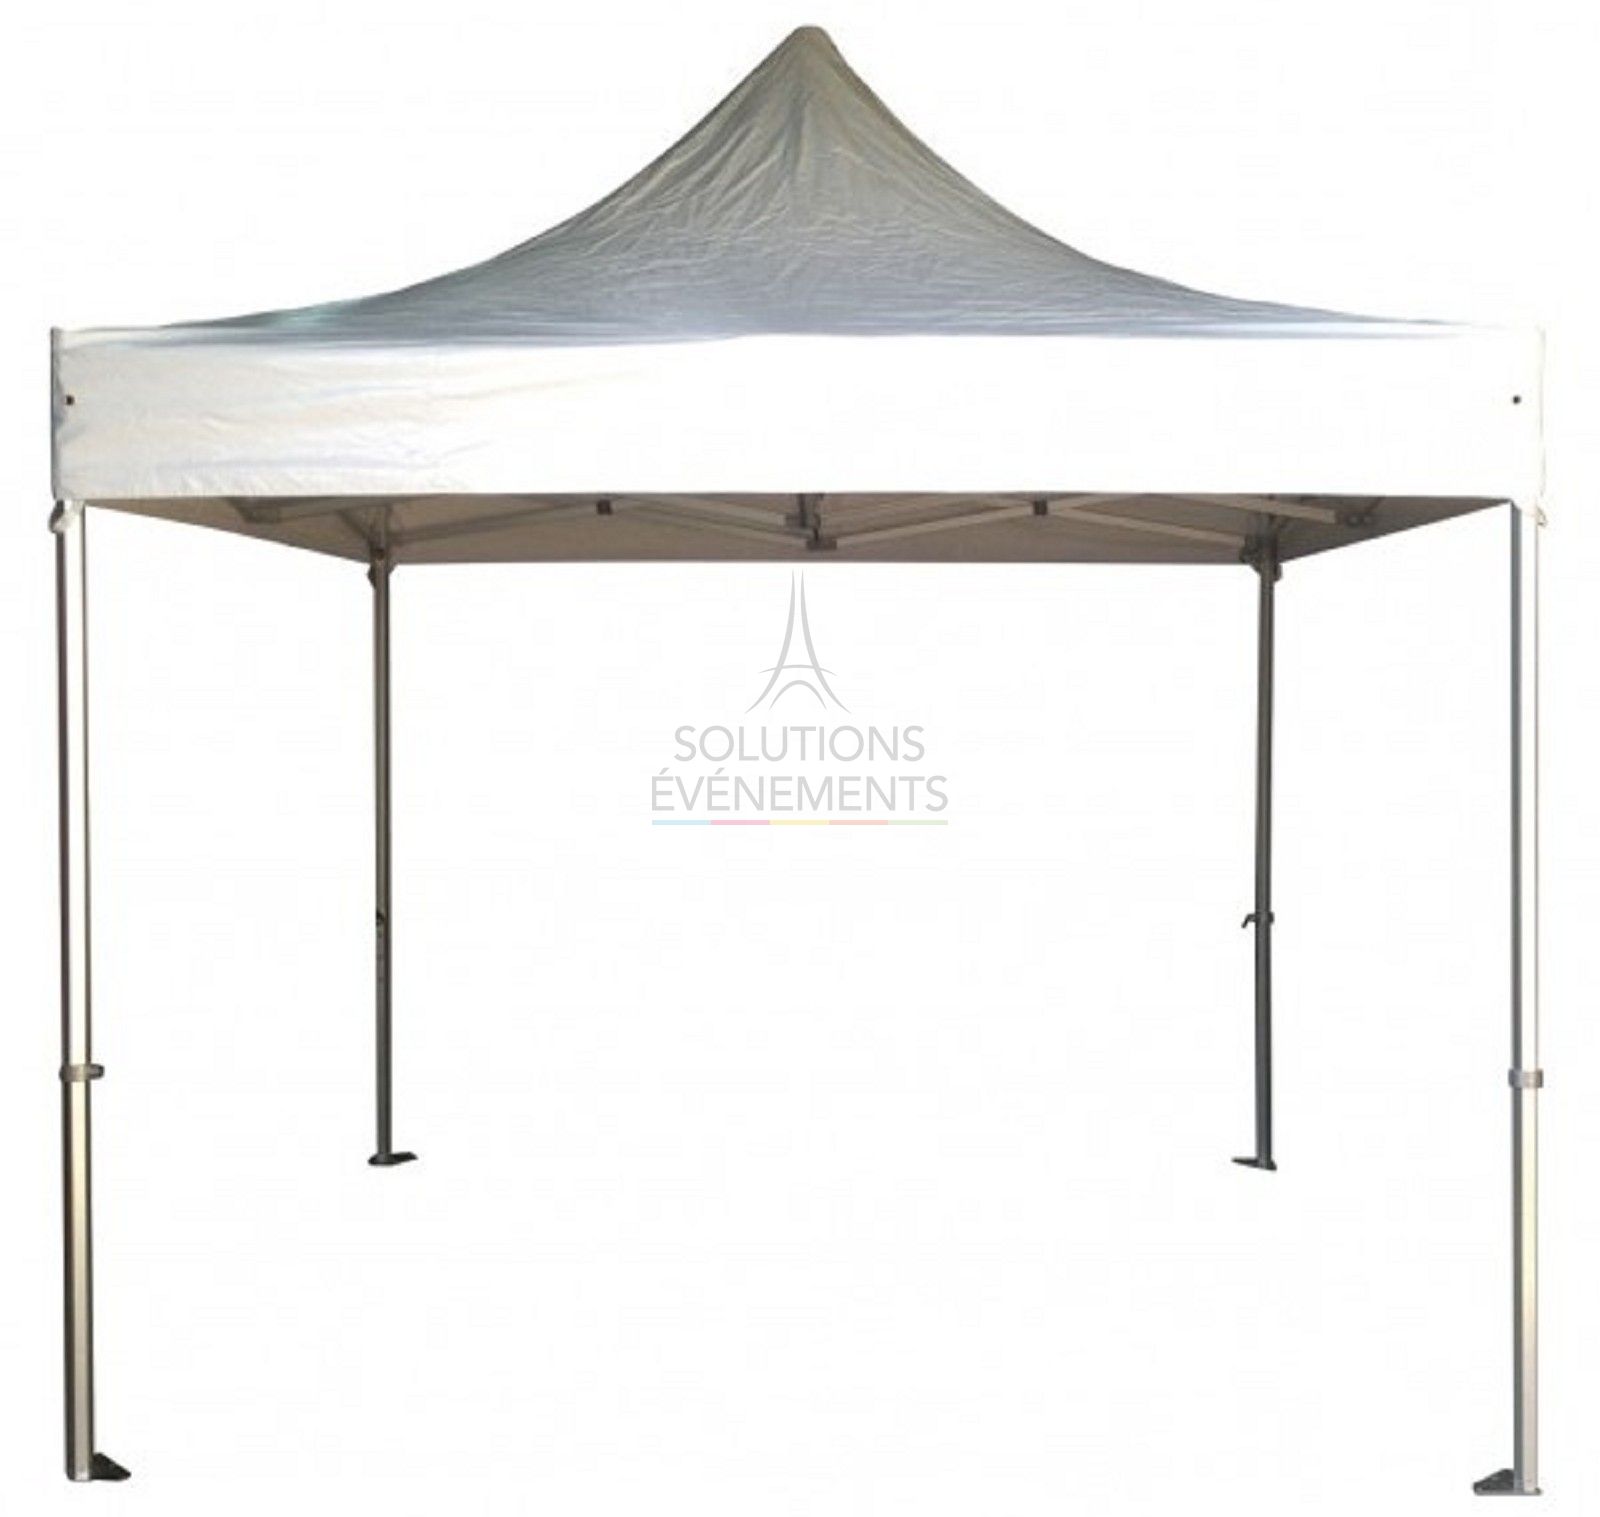 Marquee rental, Barnum, foldable tent for your outdoor events.